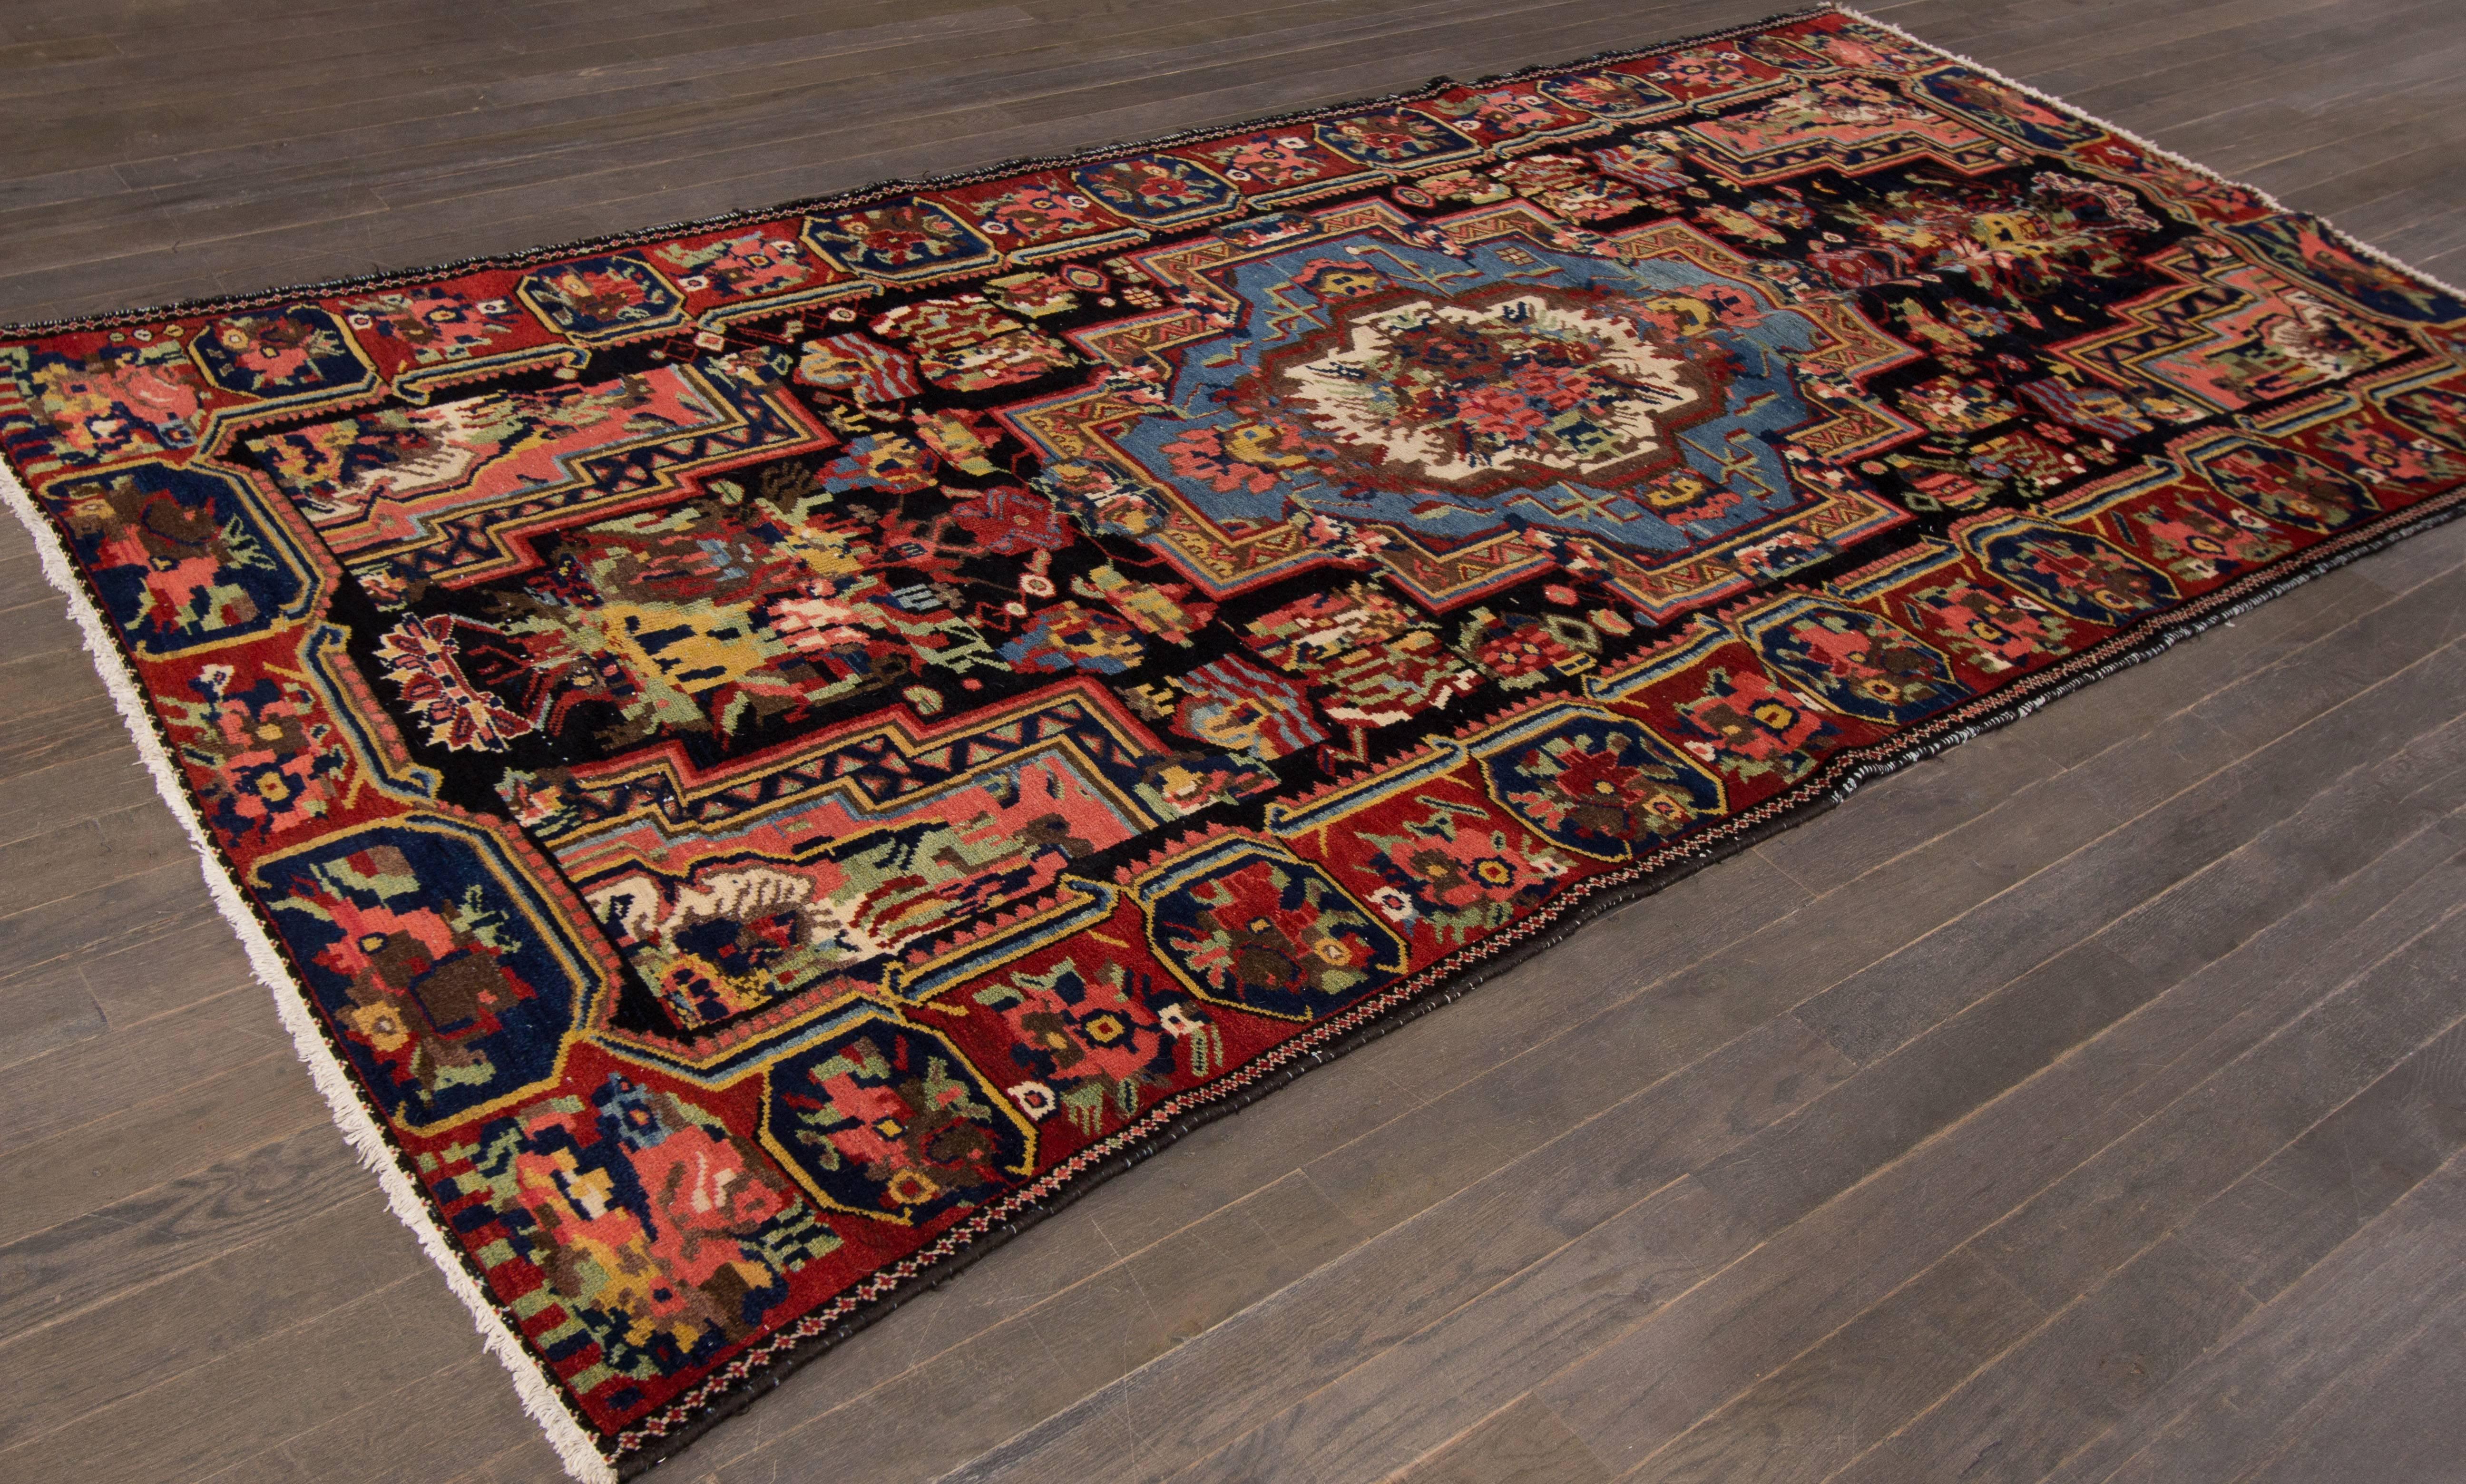 A hand-knotted vintage Bakhtiari rug with a geometric medallion design on a black field. Accents of red, brown, blue and yellow throughout the piece. This rug measures 5'.1 x 10'.4.